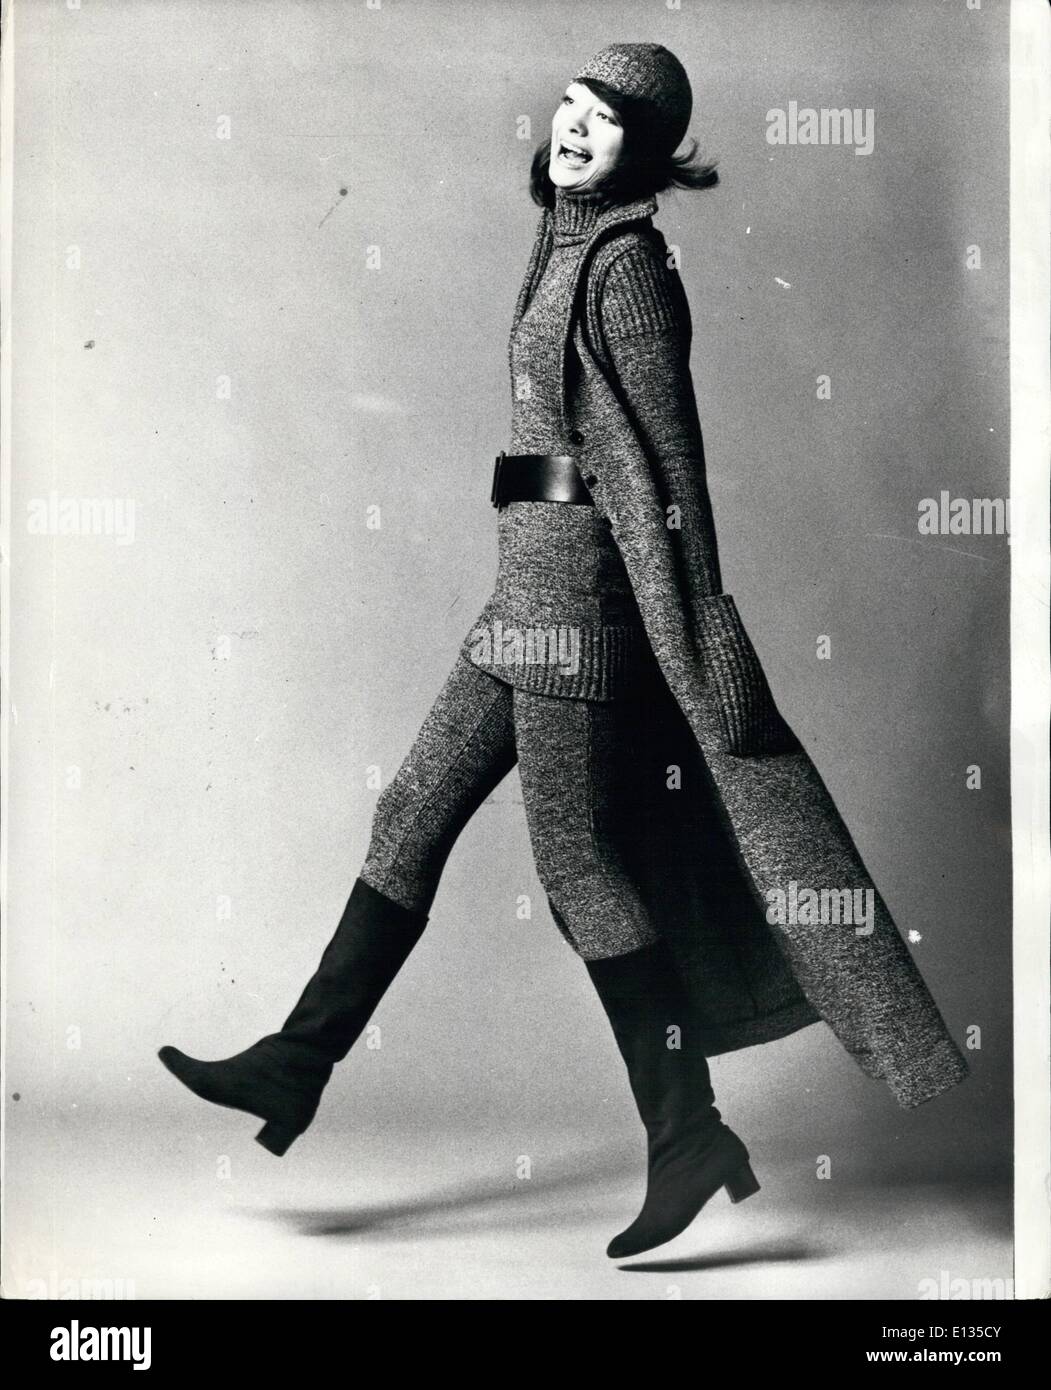 Feb. 26, 2012 - the rough weather.: A warm ensemble in speckled black and white from Paris. The pants which fit like ski-pants are worn with thigh-length polo necked sweater maxi coat and small round pull-on cap. Stock Photo